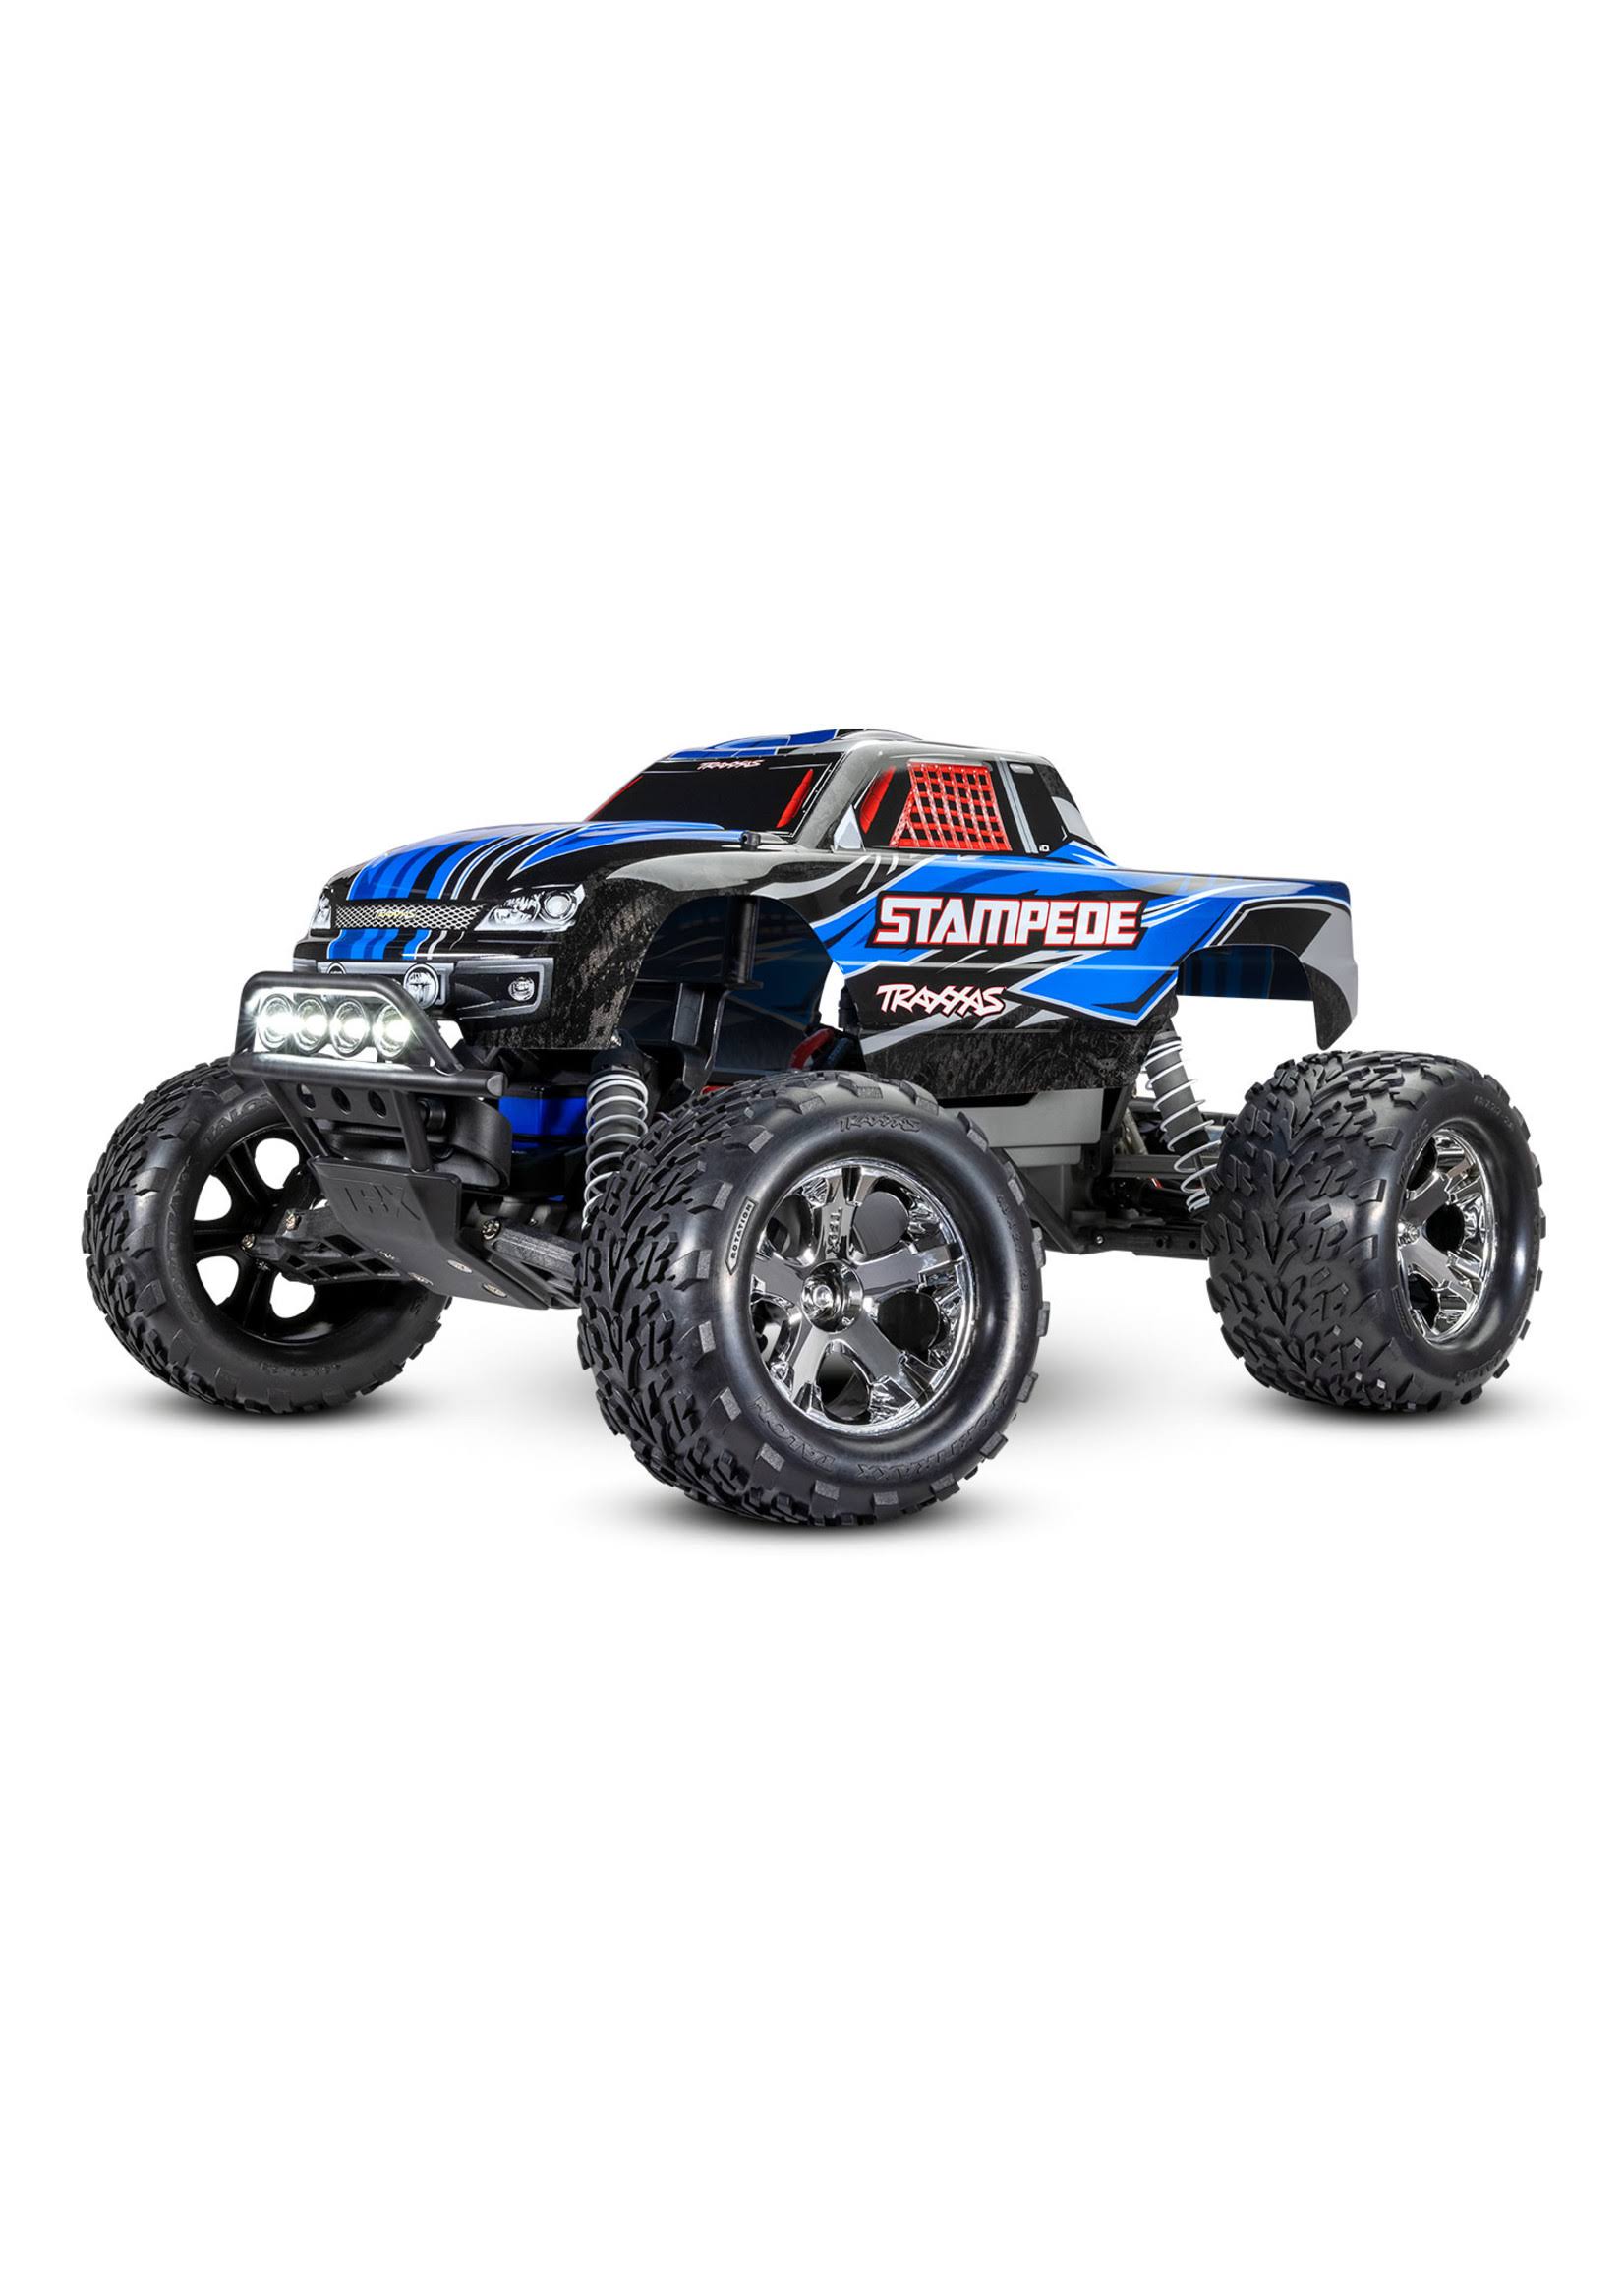 Traxxas Stampede 1/10 2wd XL-5 With Charger Battery & LED Lights Blue